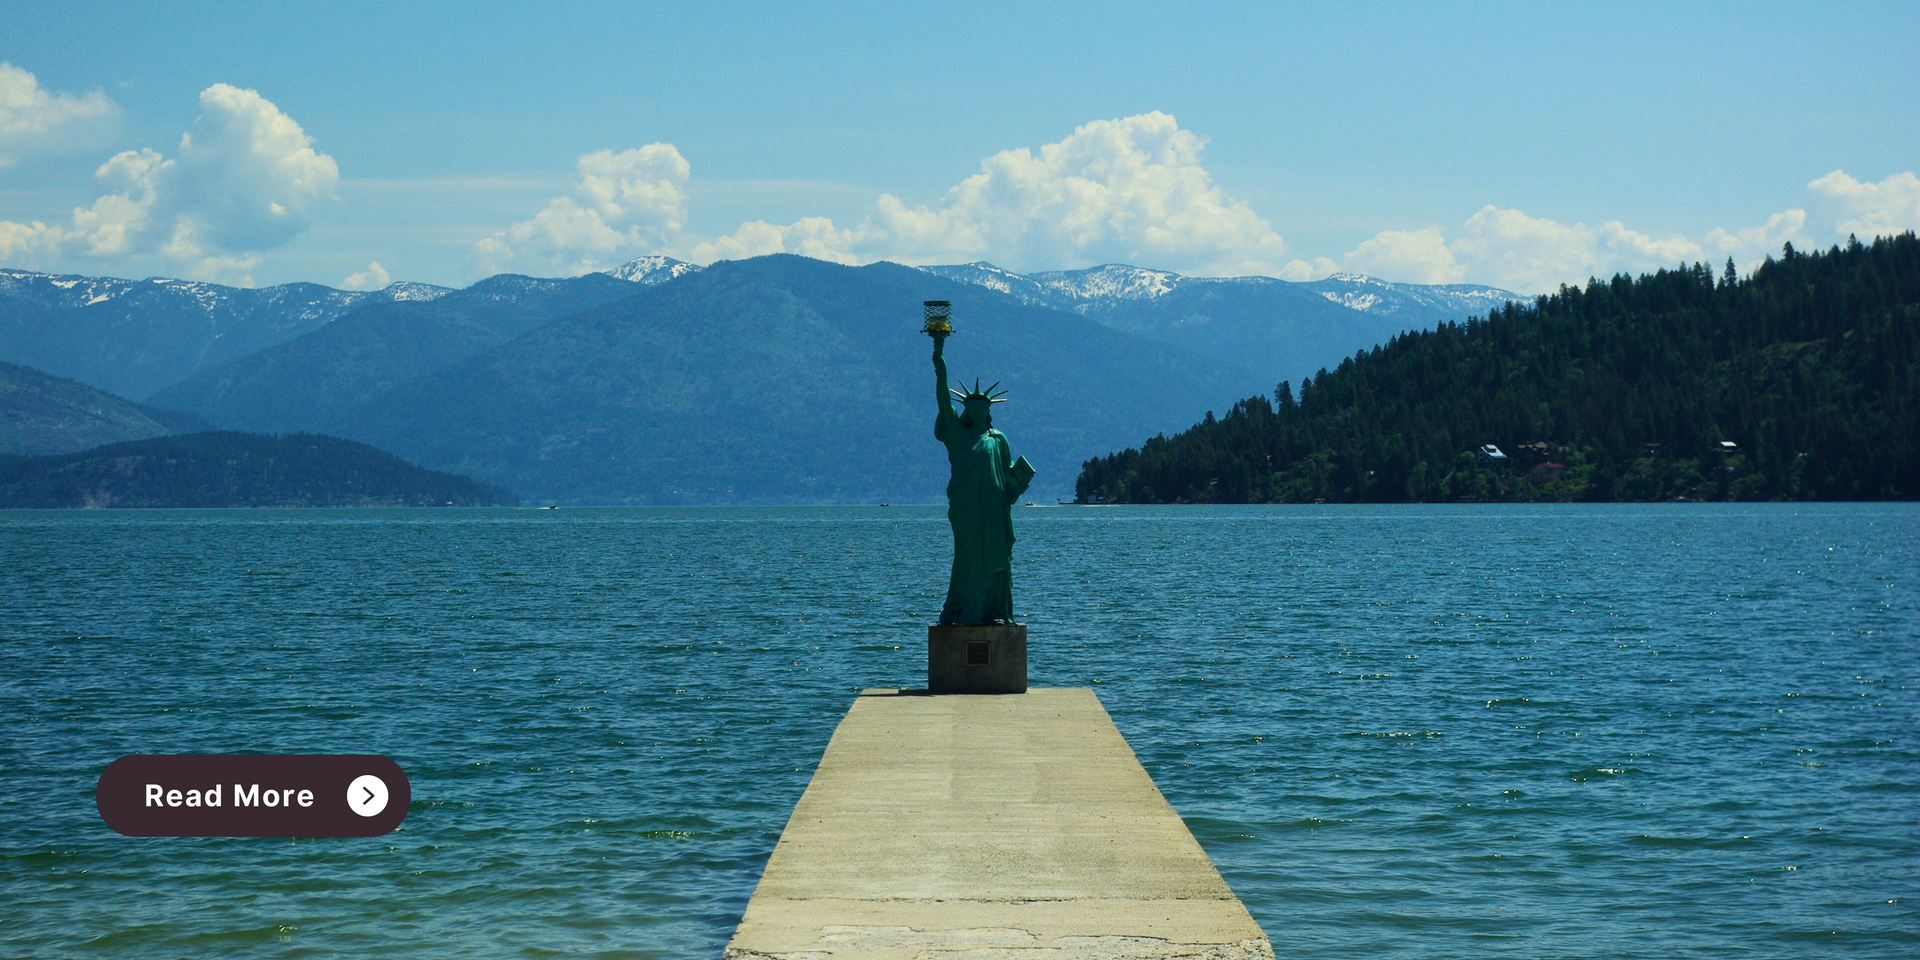 Considering buying real estate in Sandpoint Idaho? Learn more about the area in this article.